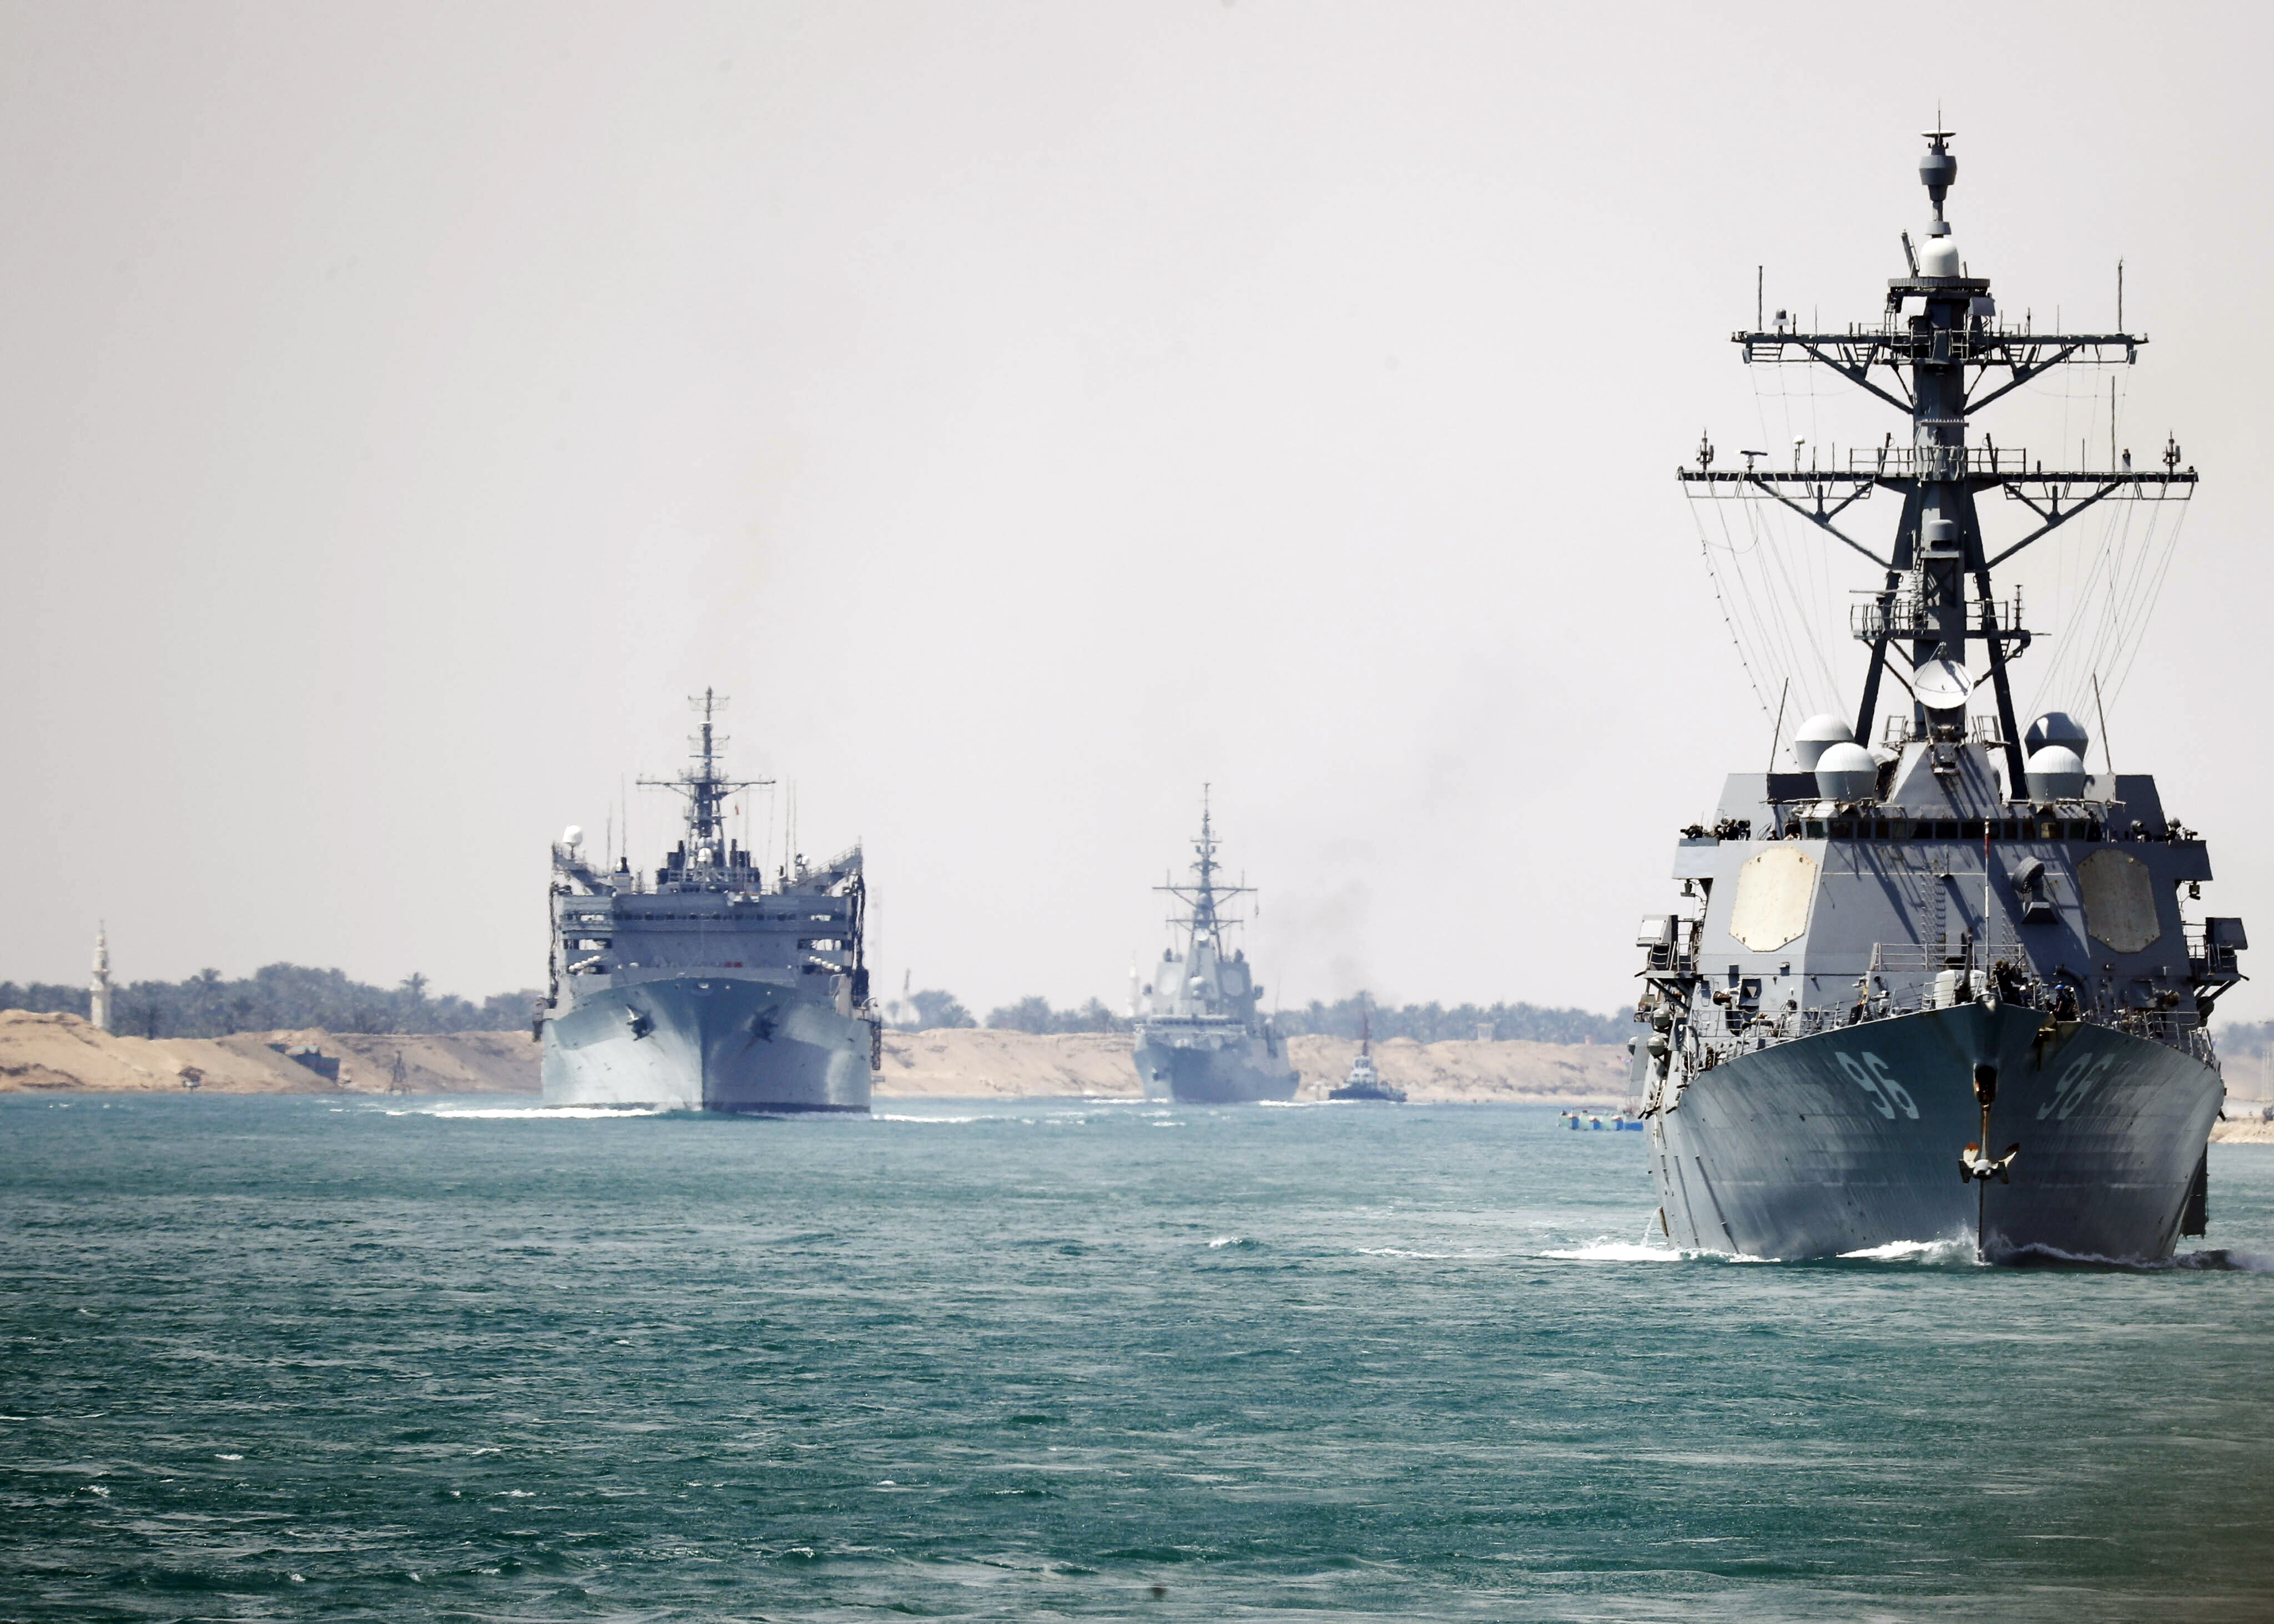 In this photo provided by the U.S. Navy, the Abraham Lincoln Carrier Strike Group transits the Suez Canal, Thursday, May 9, 2019. The Abraham Lincoln Carrier Strike Group is deployed to the U.S. Central Command area of responsibility. With Abraham Lincoln as the flagship, deployed strike group assets include staffs, ships and aircraft of Carrier Strike Group 12, Destroyer Squadron 2, USS Leyte Gulf and Carrier Air Wing 7, as well as the Spanish navy Alvaro de Bazan-class frigate ESPS Mendez Nunez. (Petty Officer 3rd Class Darion Chanelle Triplett/U.S. Navy via AP) (MC3 Darion Chanelle Triplett&mdash;AP)